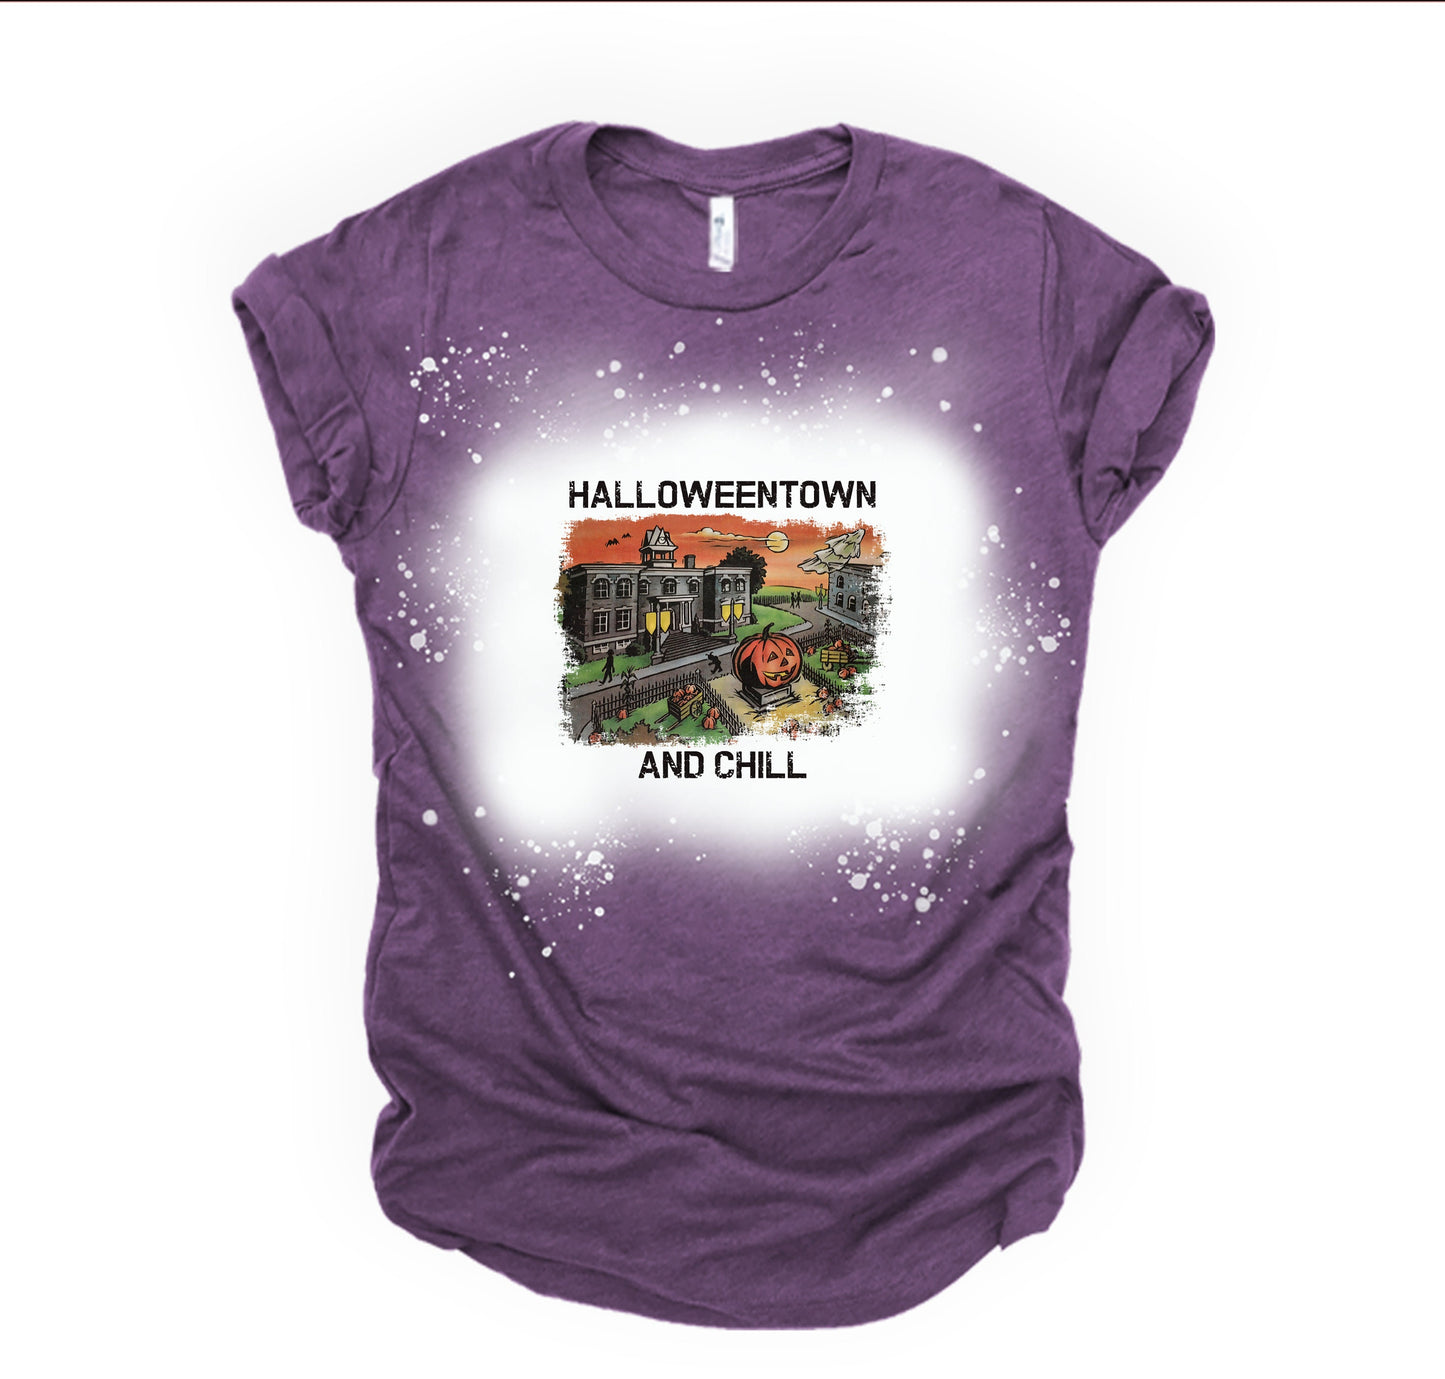 HalloweenTown - Bleached with Sublimation T-Shirt/Polyester Material